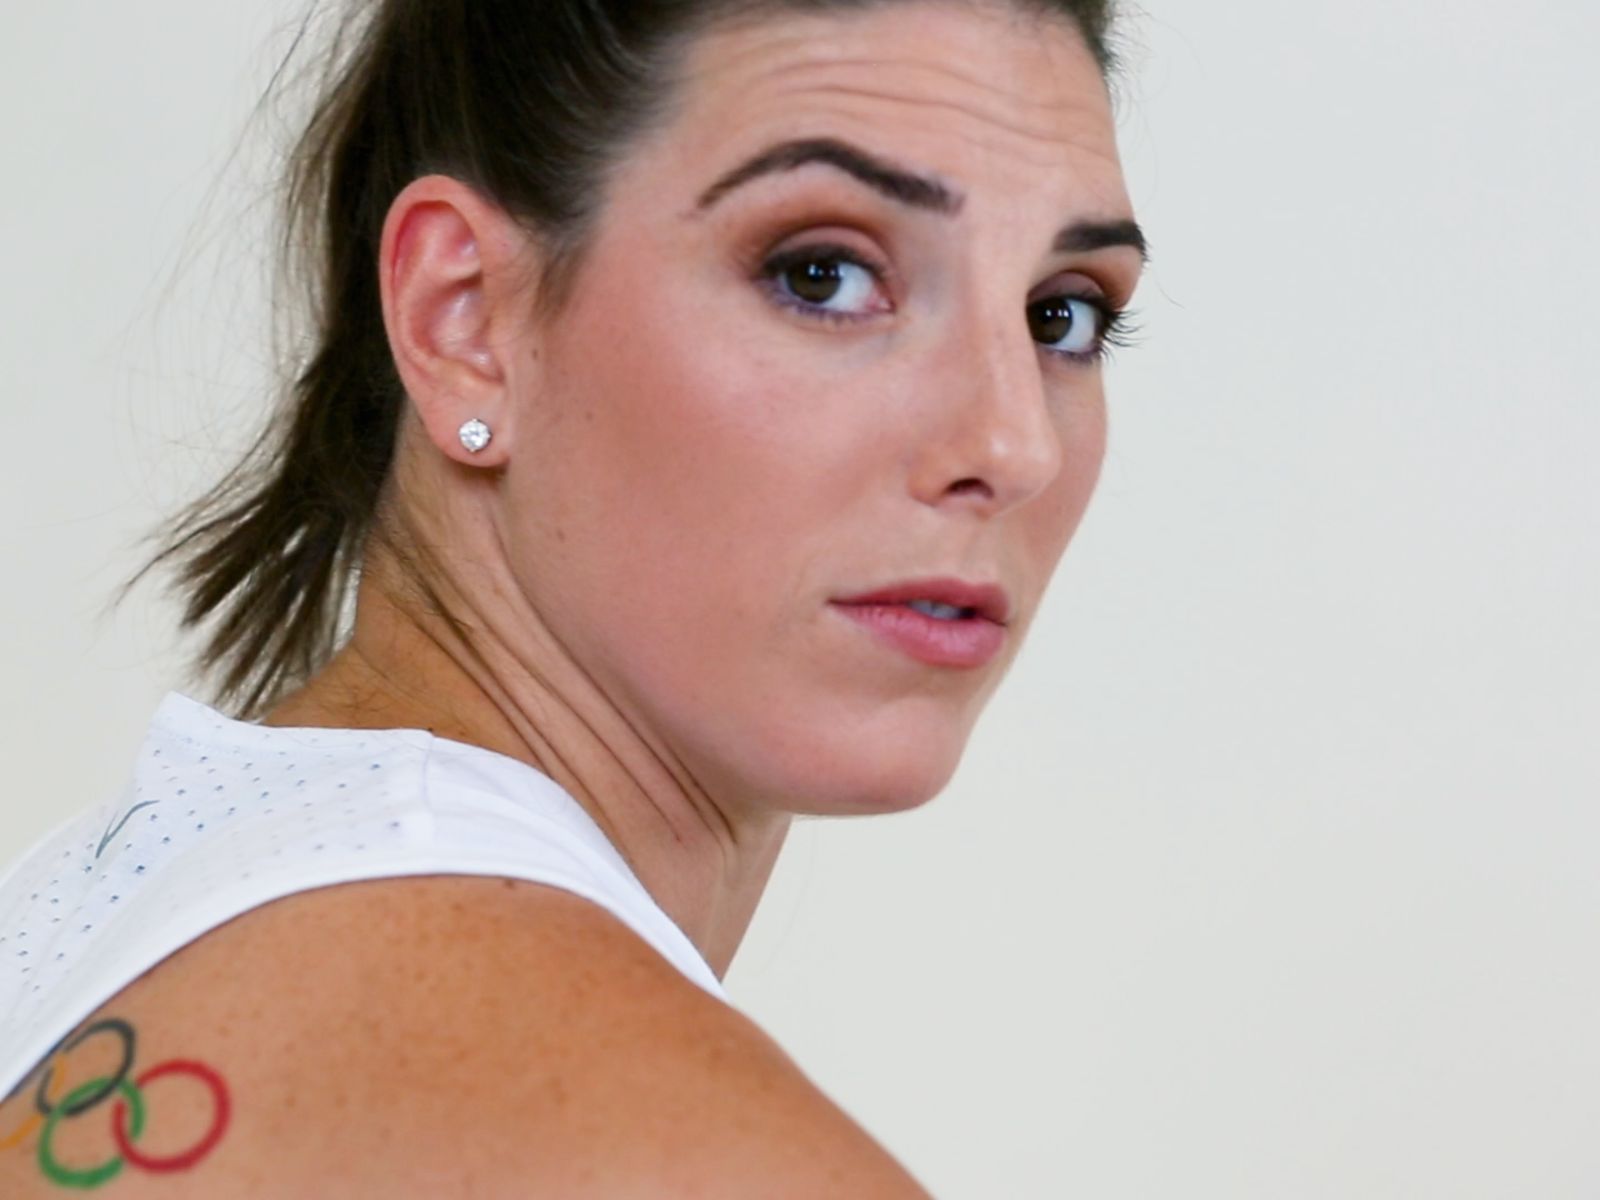 U.S. Women's Hockey Star Hilary Knight Fought For Women’s Equality—and Won